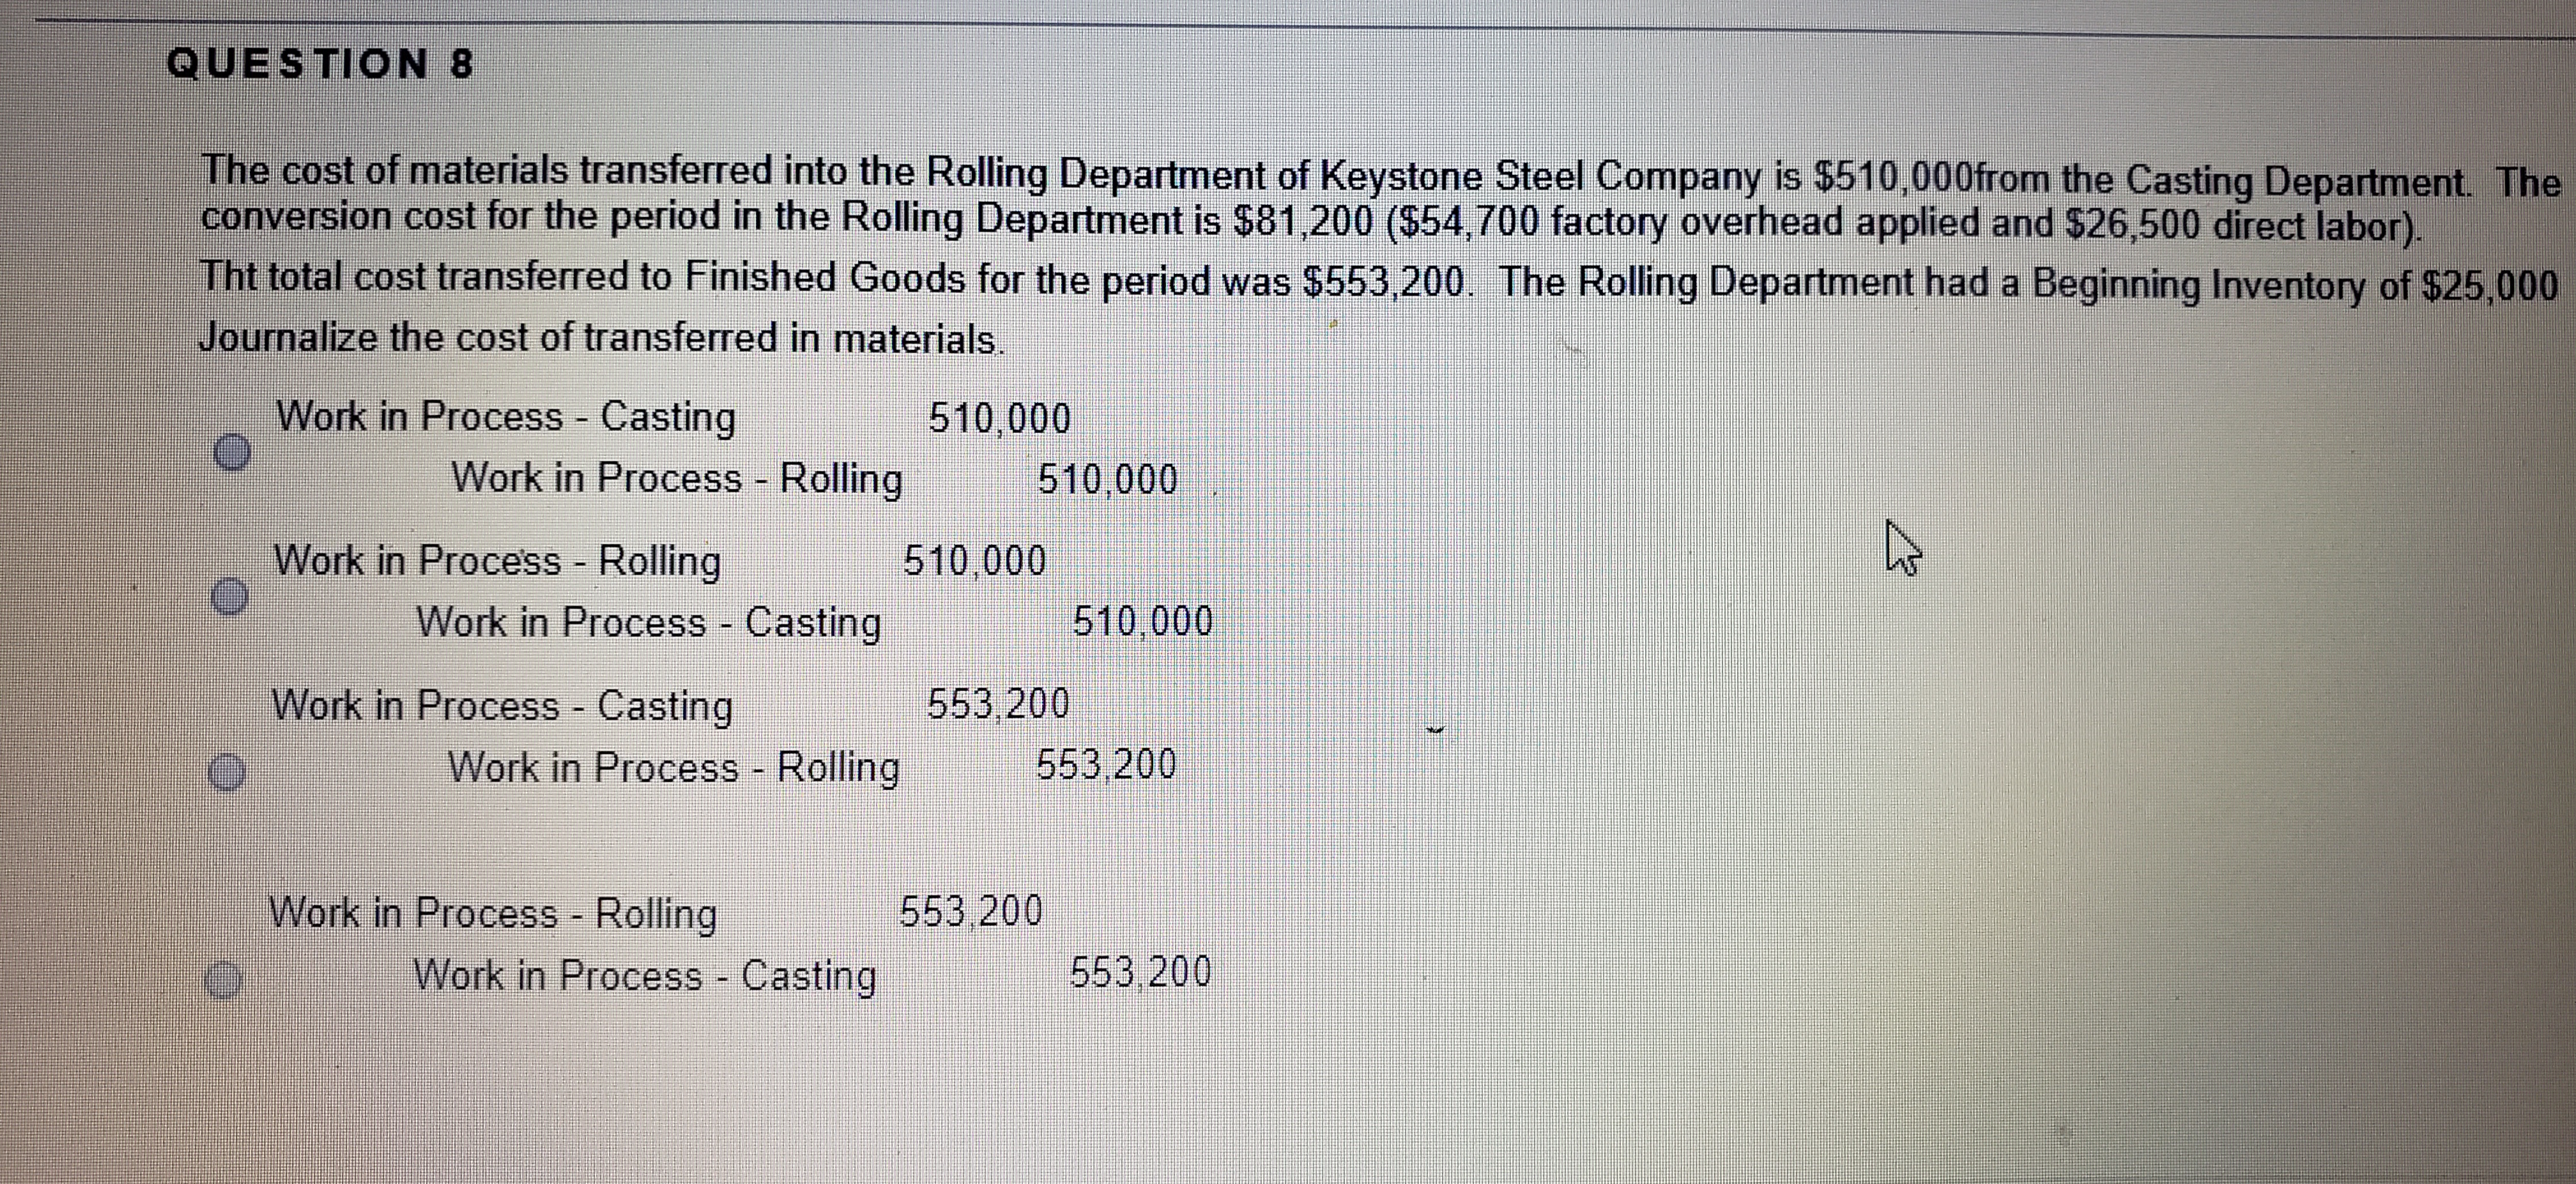 The cost of materials transferred into the Rolling Department of Keystone Steel Company is $510,000from the Casting Department. The
conversion cost for the period in the Rolling Department is $81,200 ($54,700 factory overhead applied and $26,500 direct labor).
Tht total cost transferred to Finished Goods for the period was $553,200. The Rolling Department had a Beginning Inventory of $25,000
Journalize the cost of transferred in materials.
